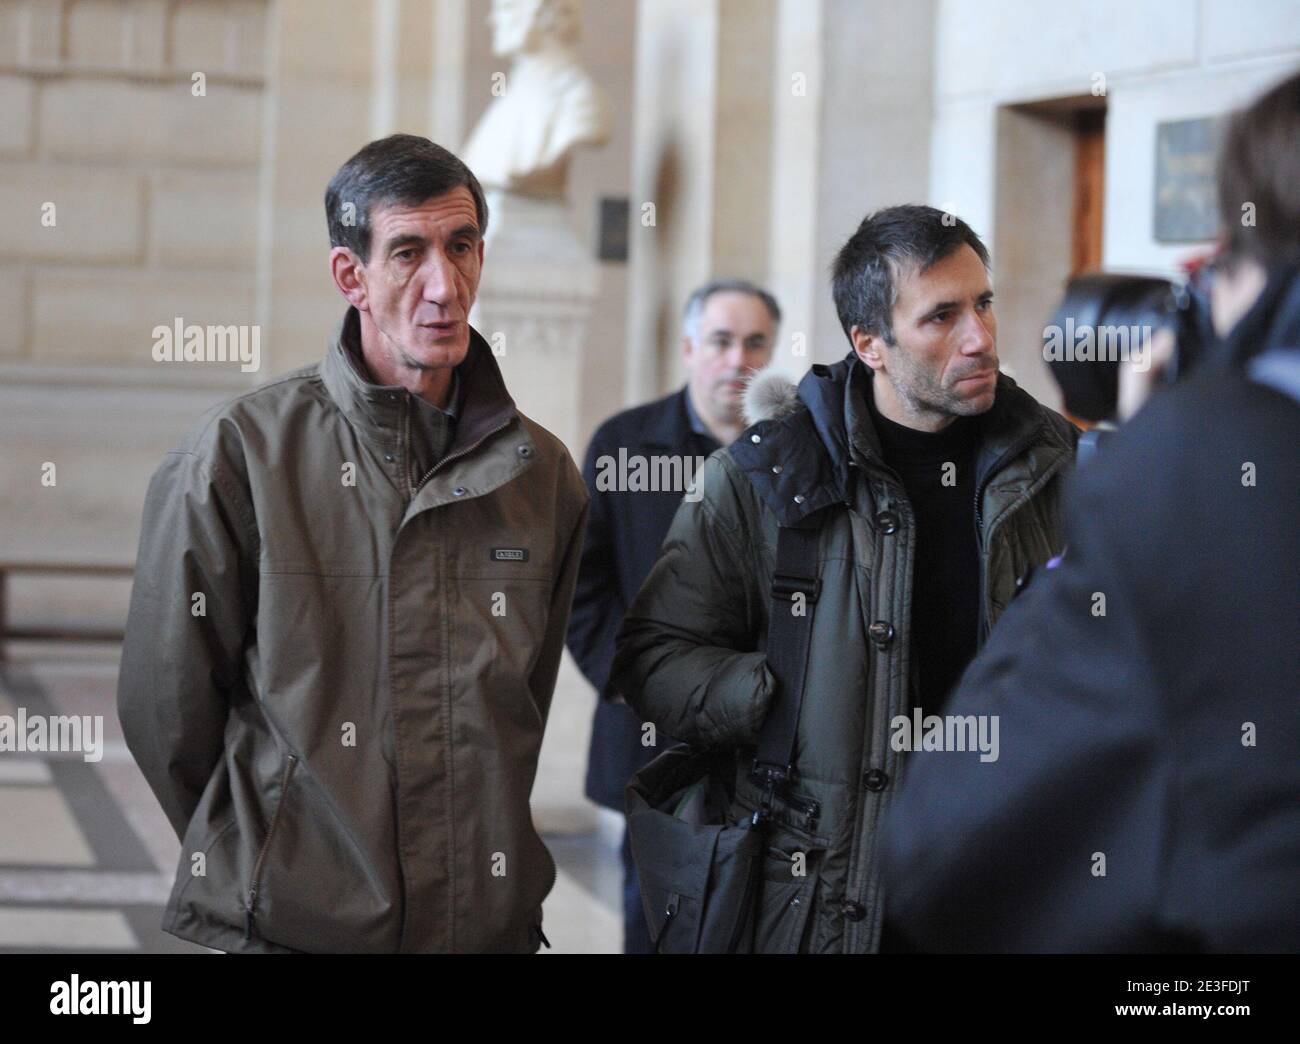 Joseph Versini at the Paris courthouse to attend the Yvan Colonna Trial, in Paris, France, on March 6, 2009. Photo by Mousse/ABACAPRESS.COM Stock Photo